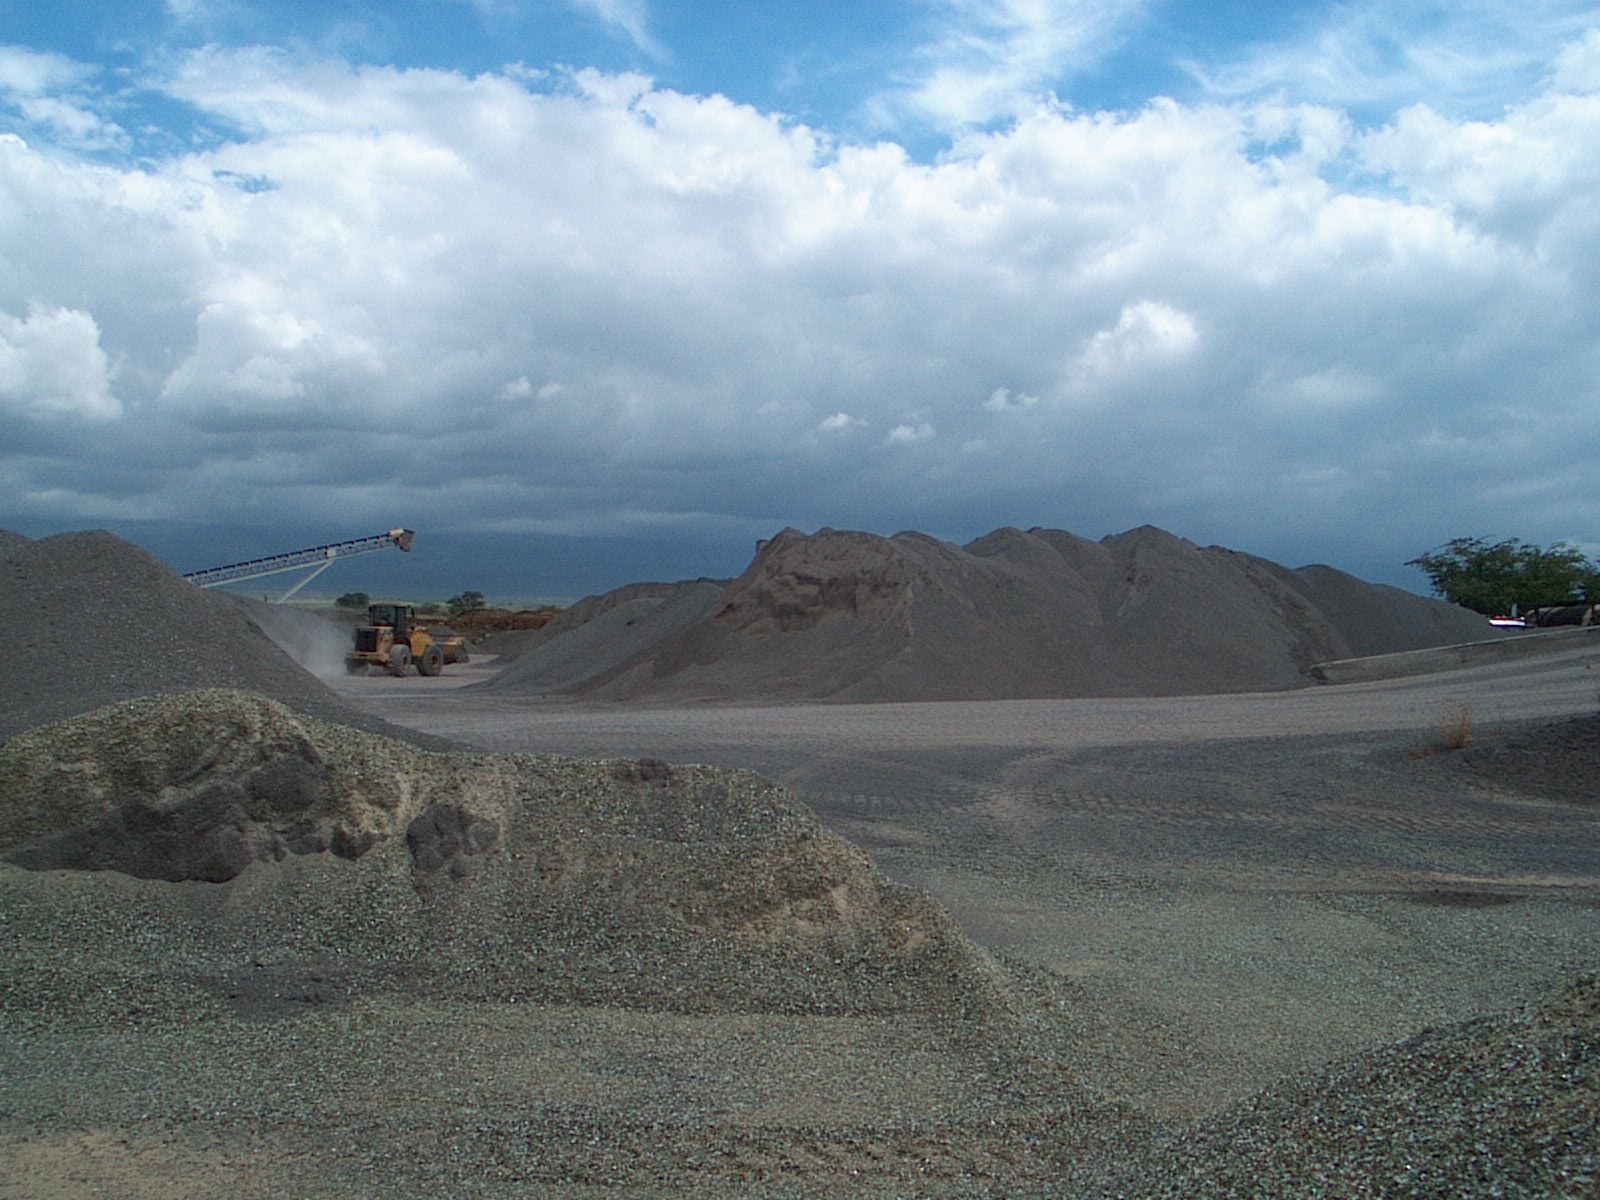 The aggregate stockpile in the foreground at this asphalt plant consists of recycled glass.